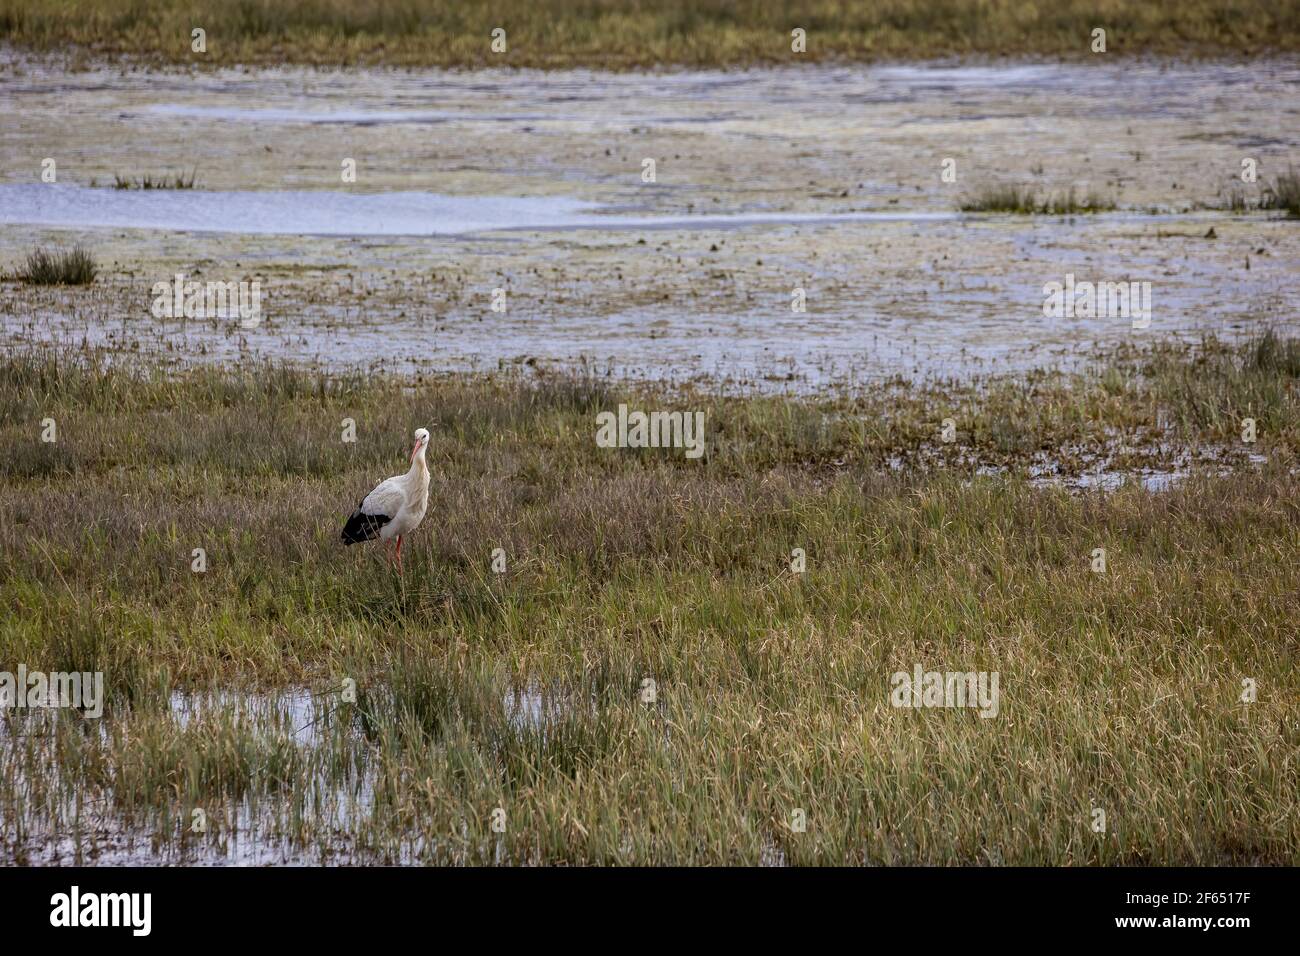 Stork at a wet meadow at a little pond called Mönchbruchweiher in the Mönchbruch natural reserve next to Frankfurt in Hesse, Germany. Stock Photo